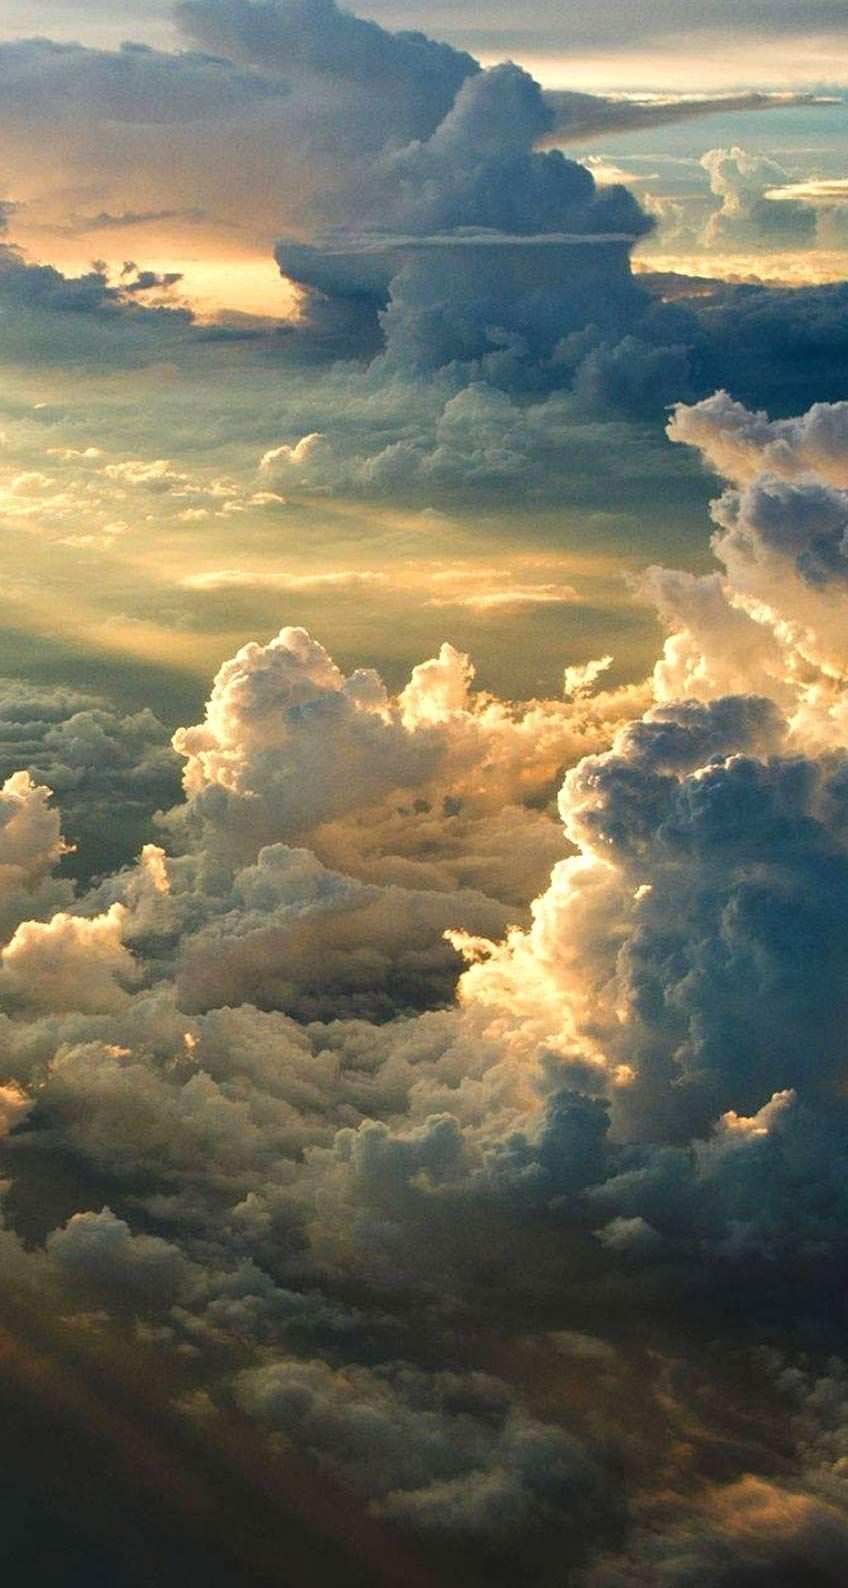 Pin By Madison Laks On Iphone Wallpapers In 2018 Clouds Sky Nature Beautiful Cloudy Sunset Wallpaper Simplech Sunset Wallpaper Beautiful Tumblr Sky Aesthetic